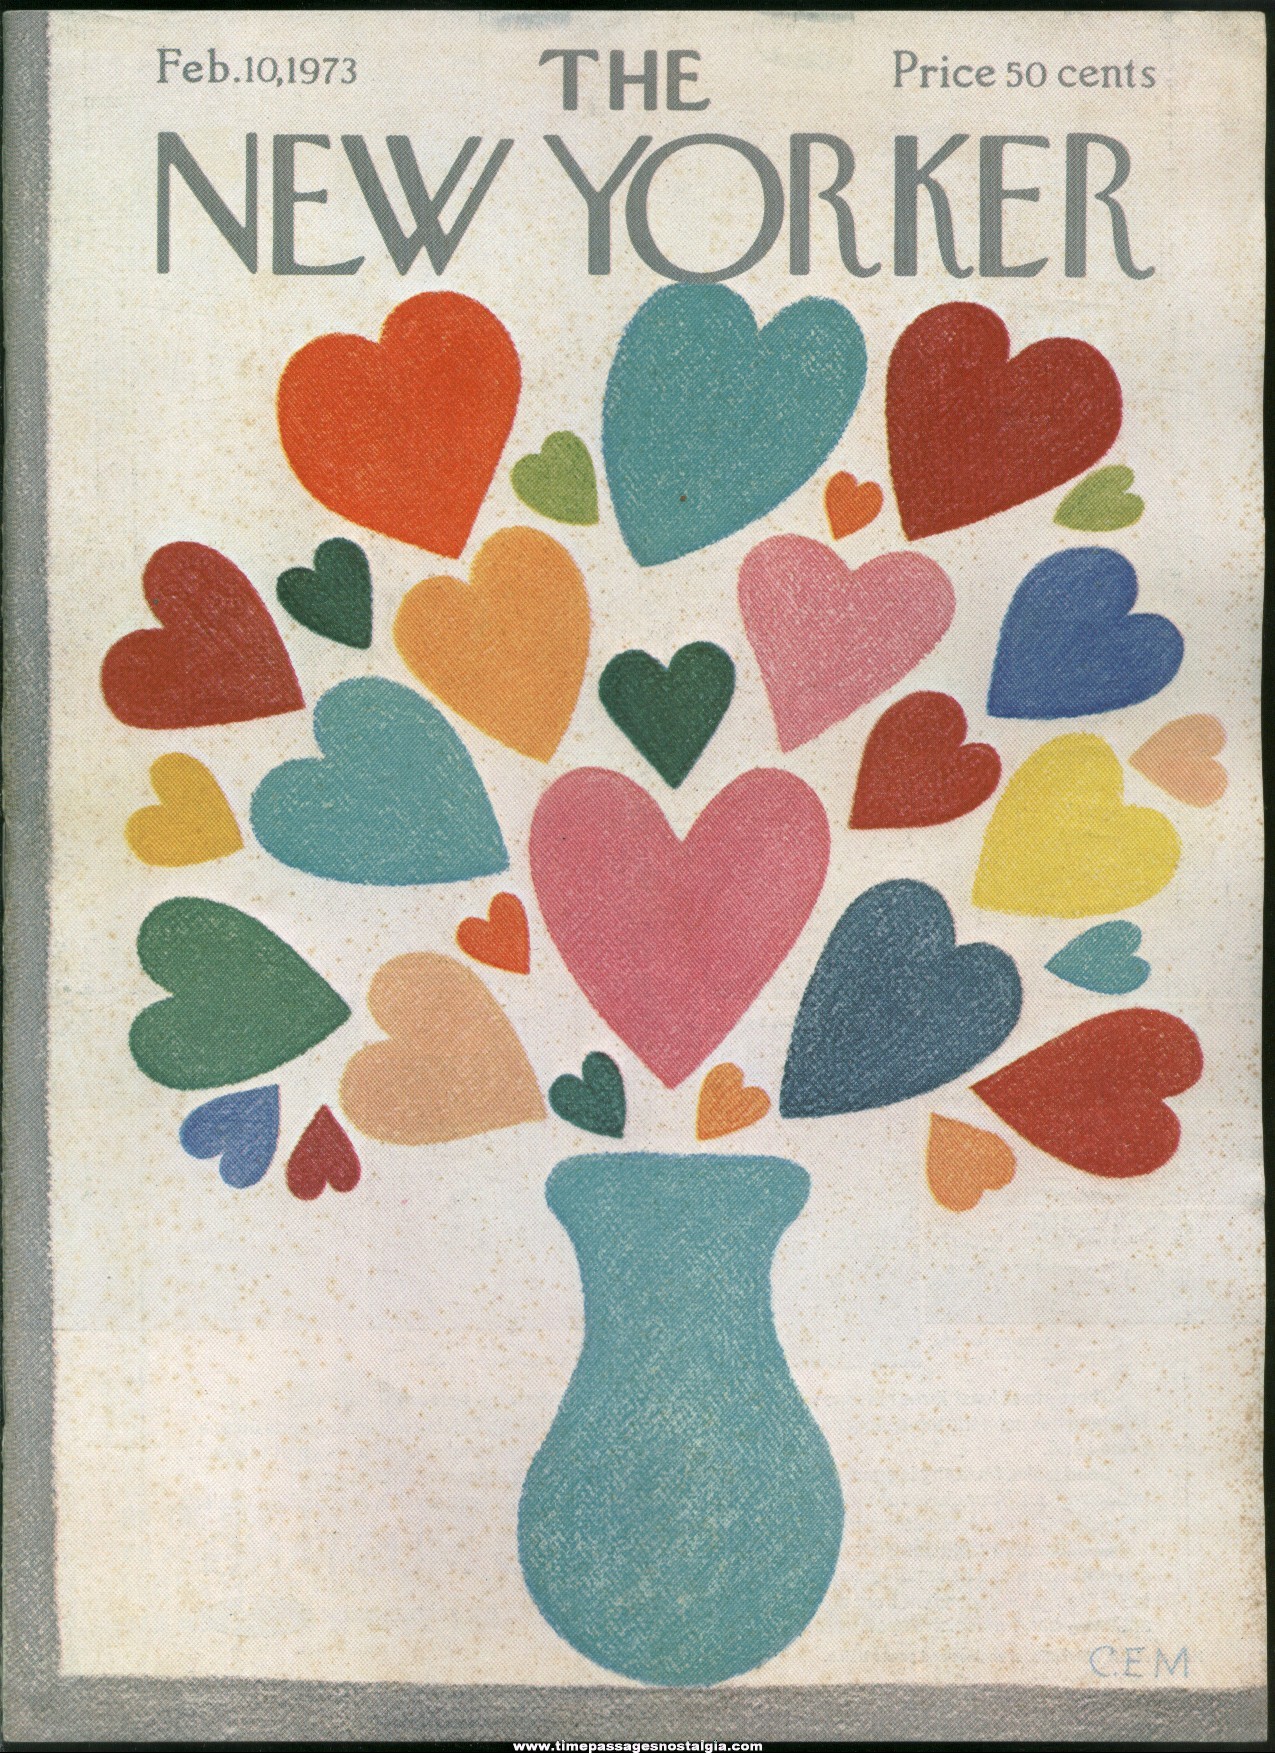 New Yorker Magazine - February 10, 1973 - Cover by Charles E. Martin